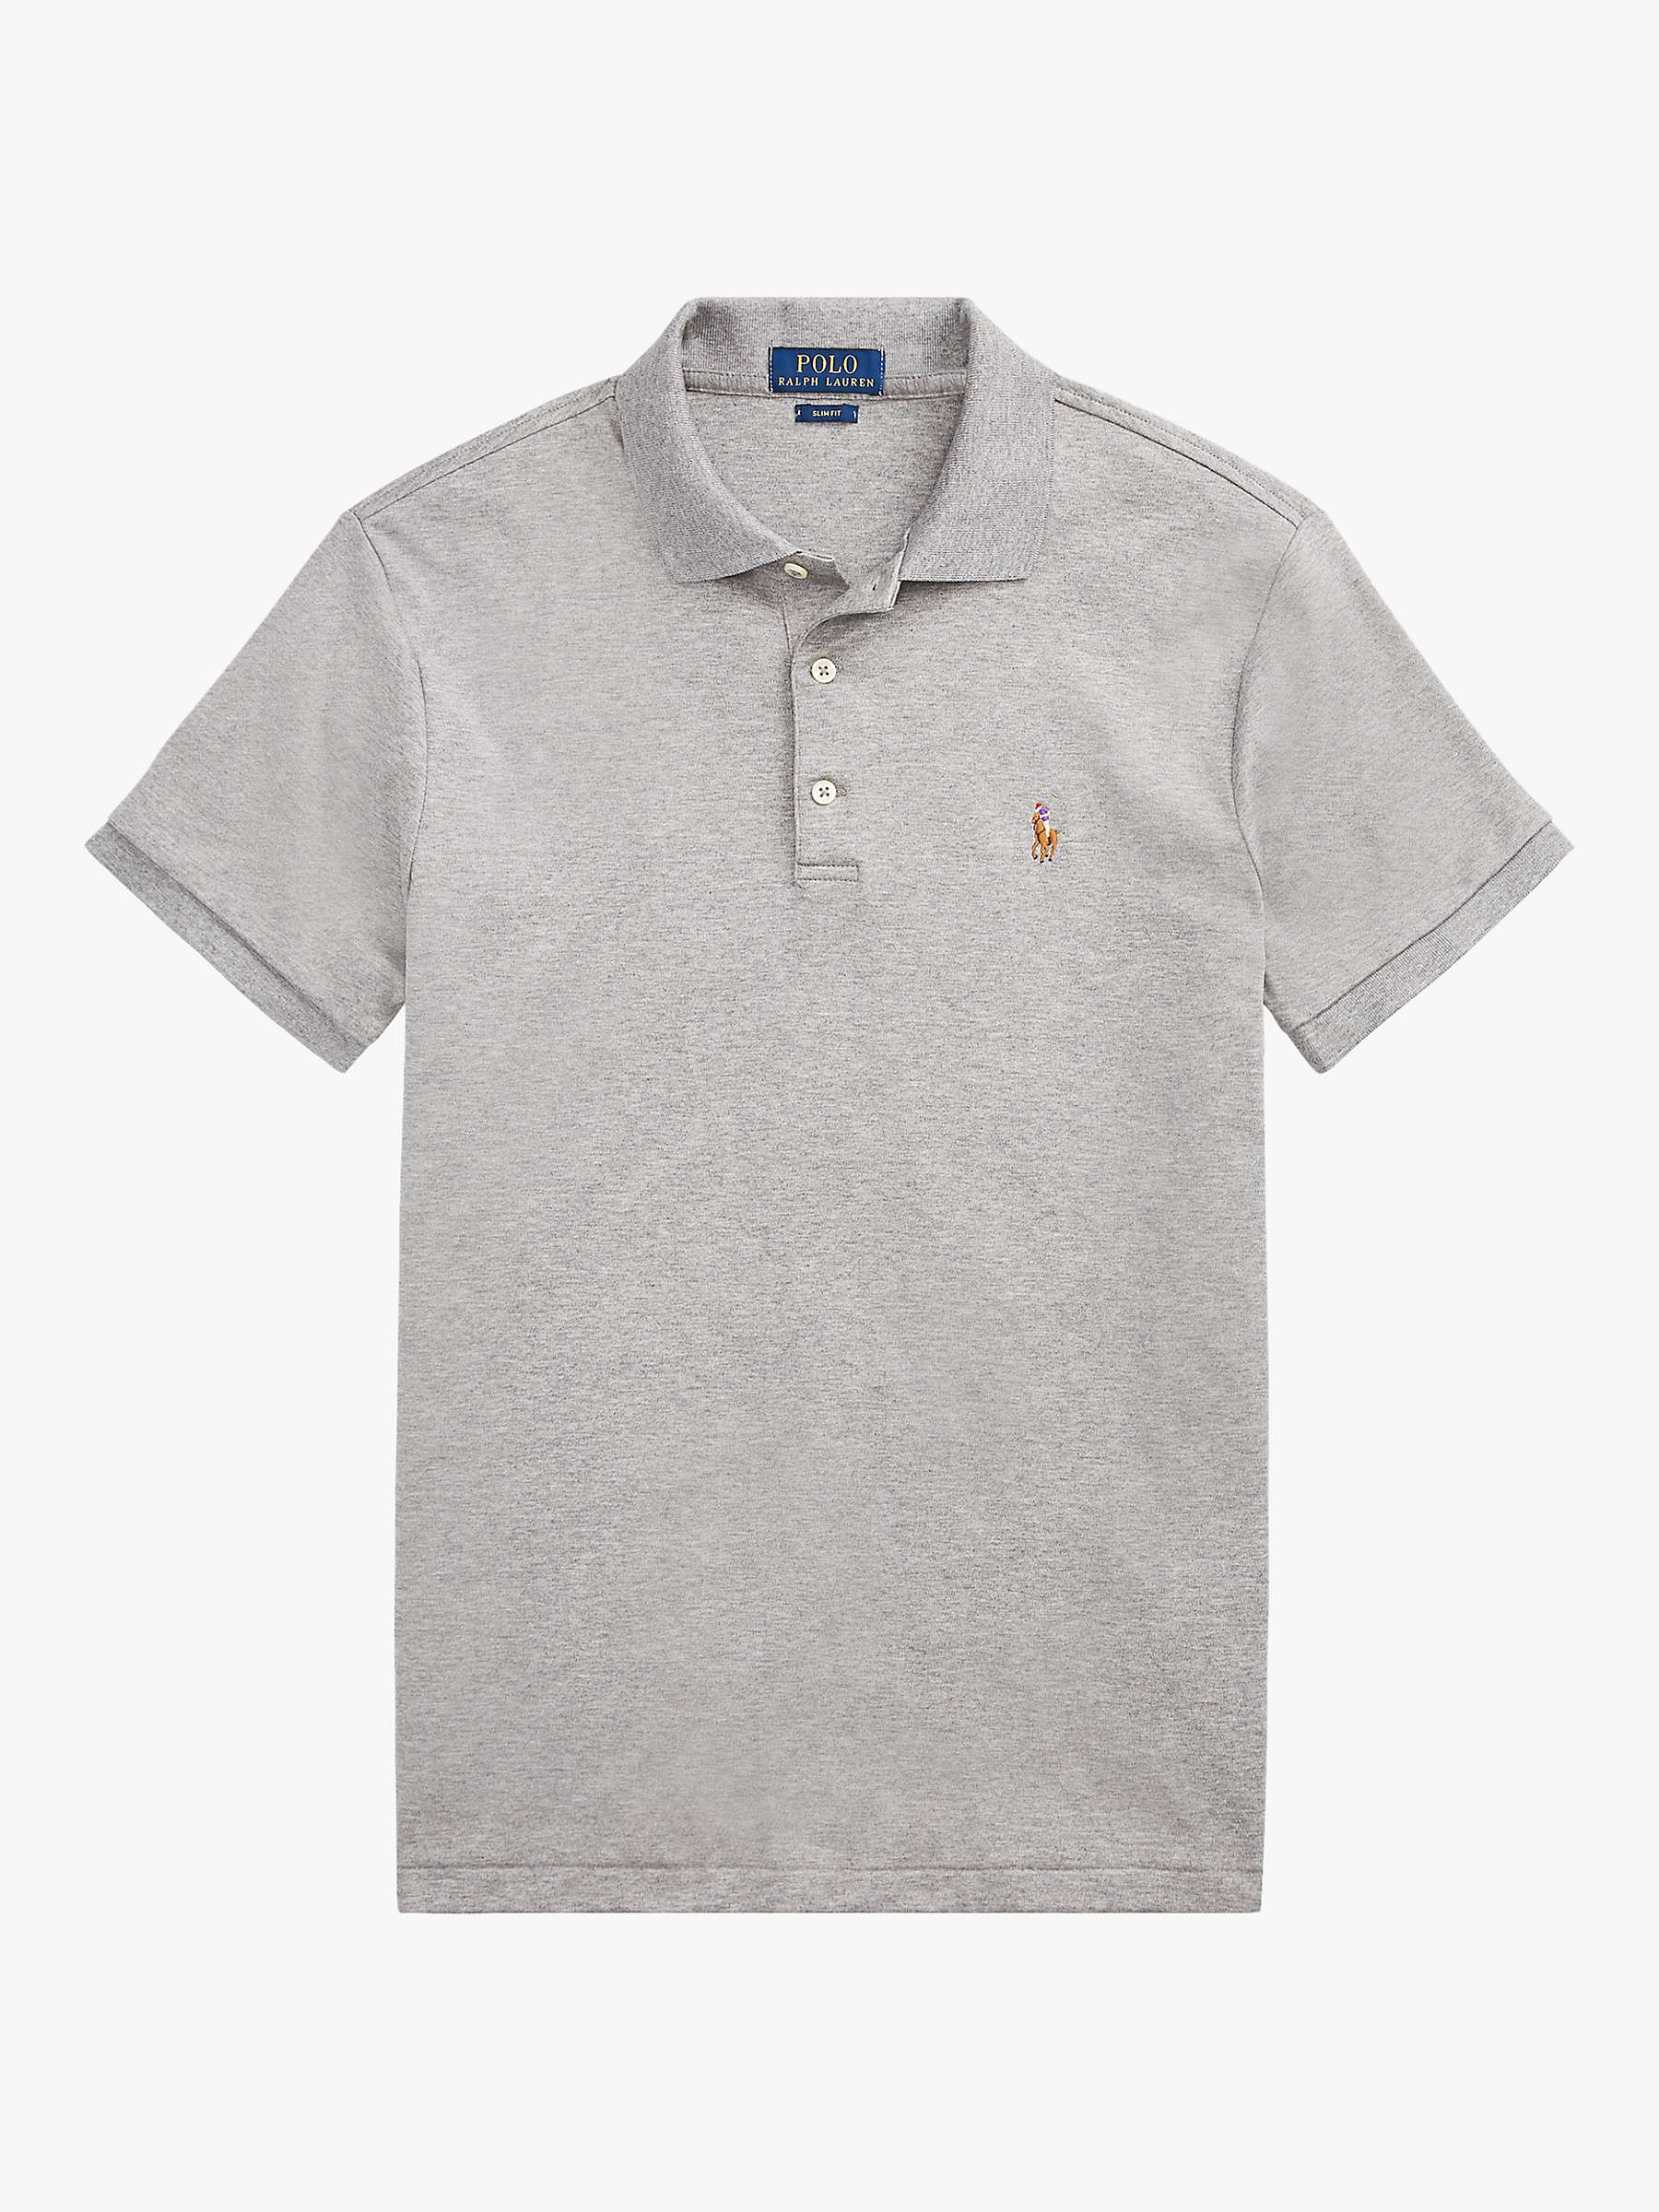 Buy Polo Ralph Lauren Slim Fit Soft Touch Polo Shirt Online at johnlewis.com